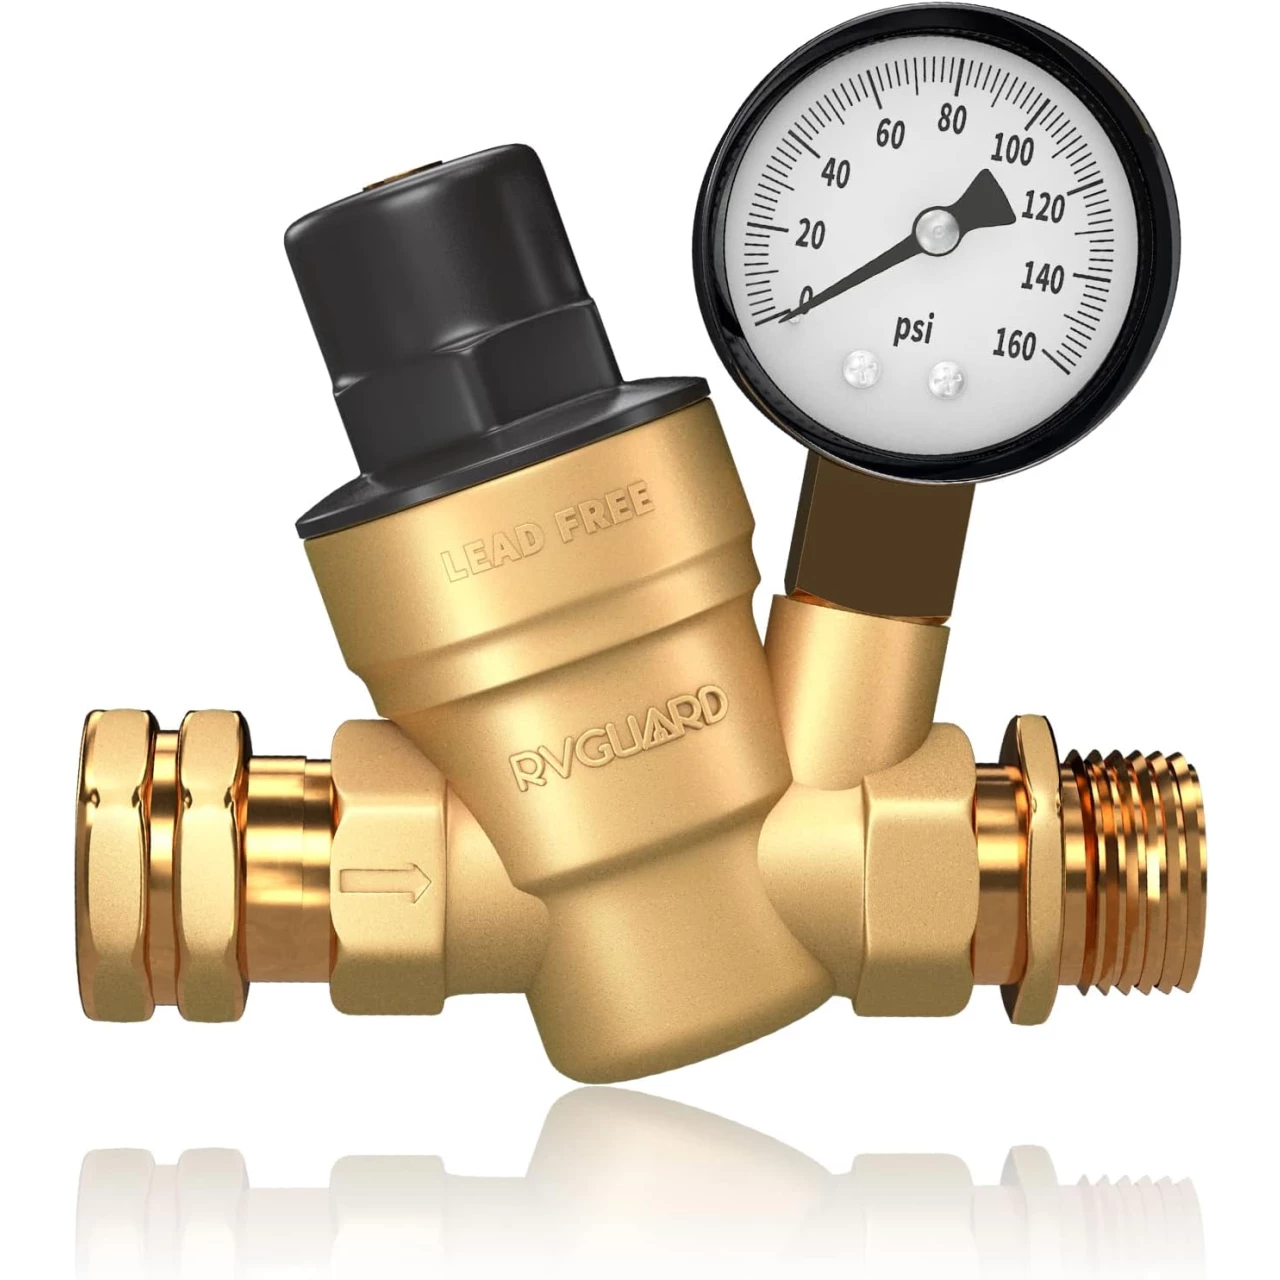 RVGUARD RV Water Pressure Regulator Valve, Brass Lead-Free Adjustable Water Pressure Reducer with Gauge and Inlet Screen Filter